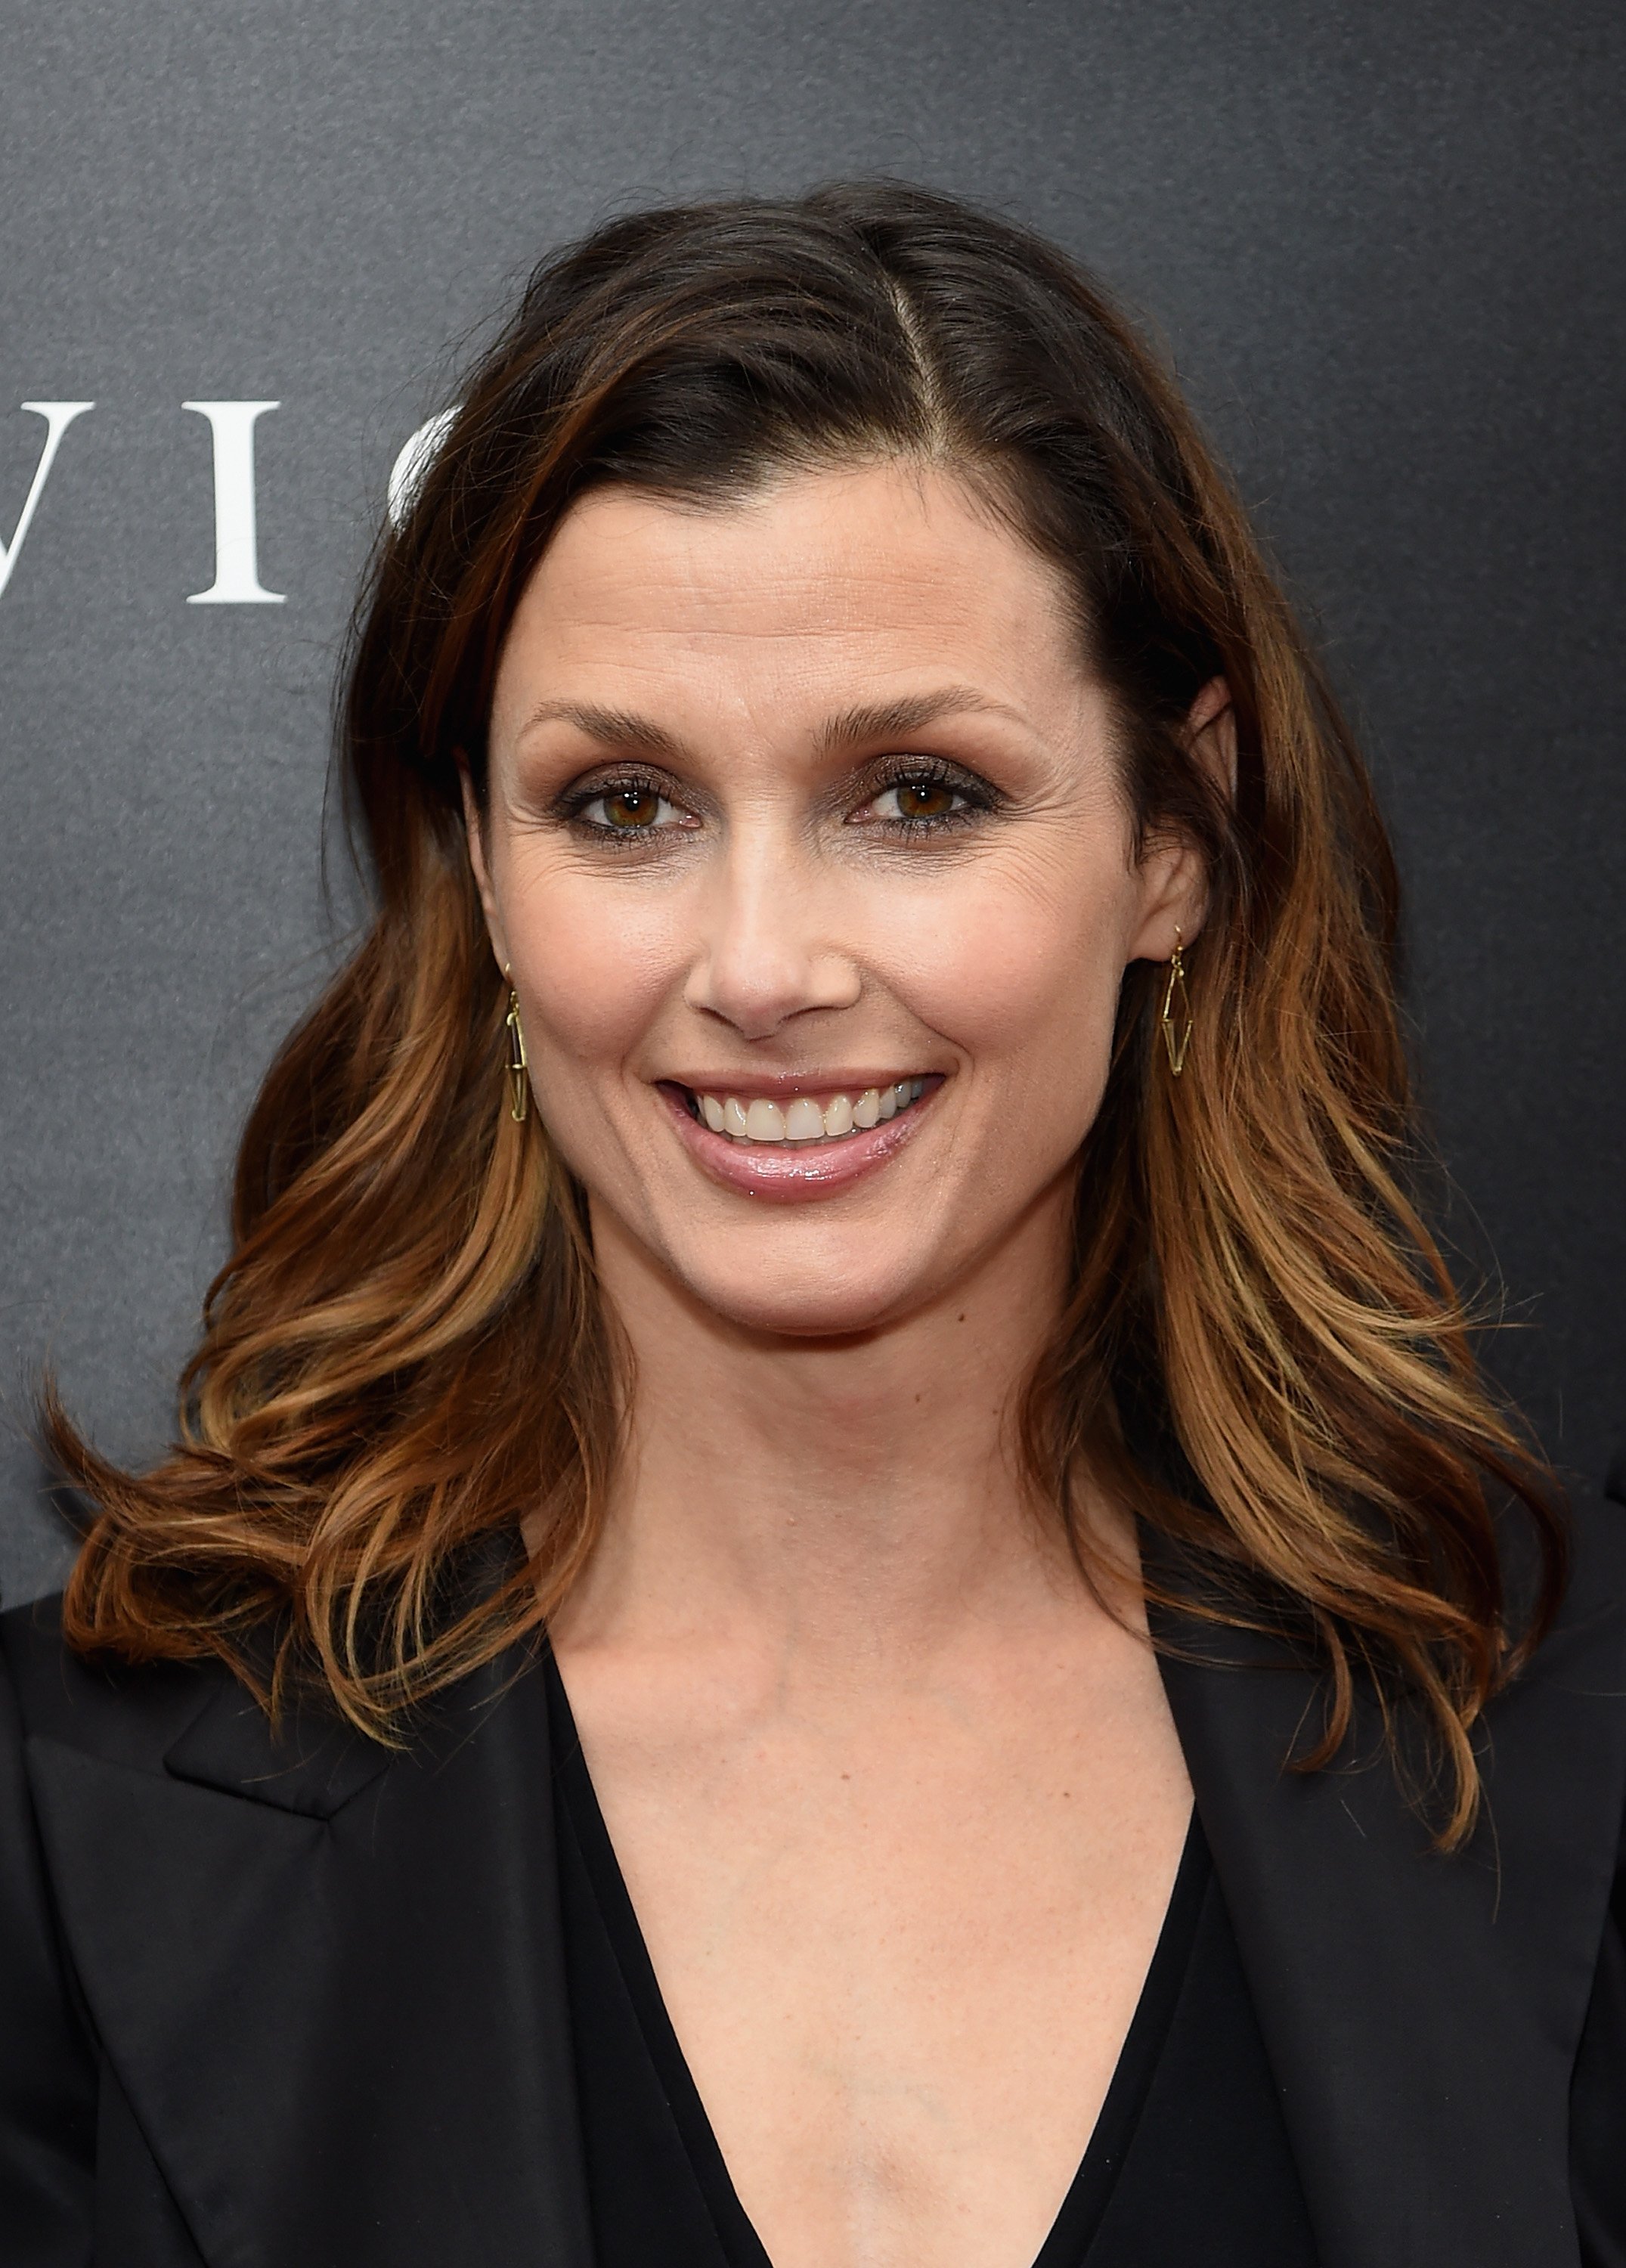 Bridget Moynahan attends the premiere of "John Wick" in New York City on October 13, 2014 | Photo: Getty Images